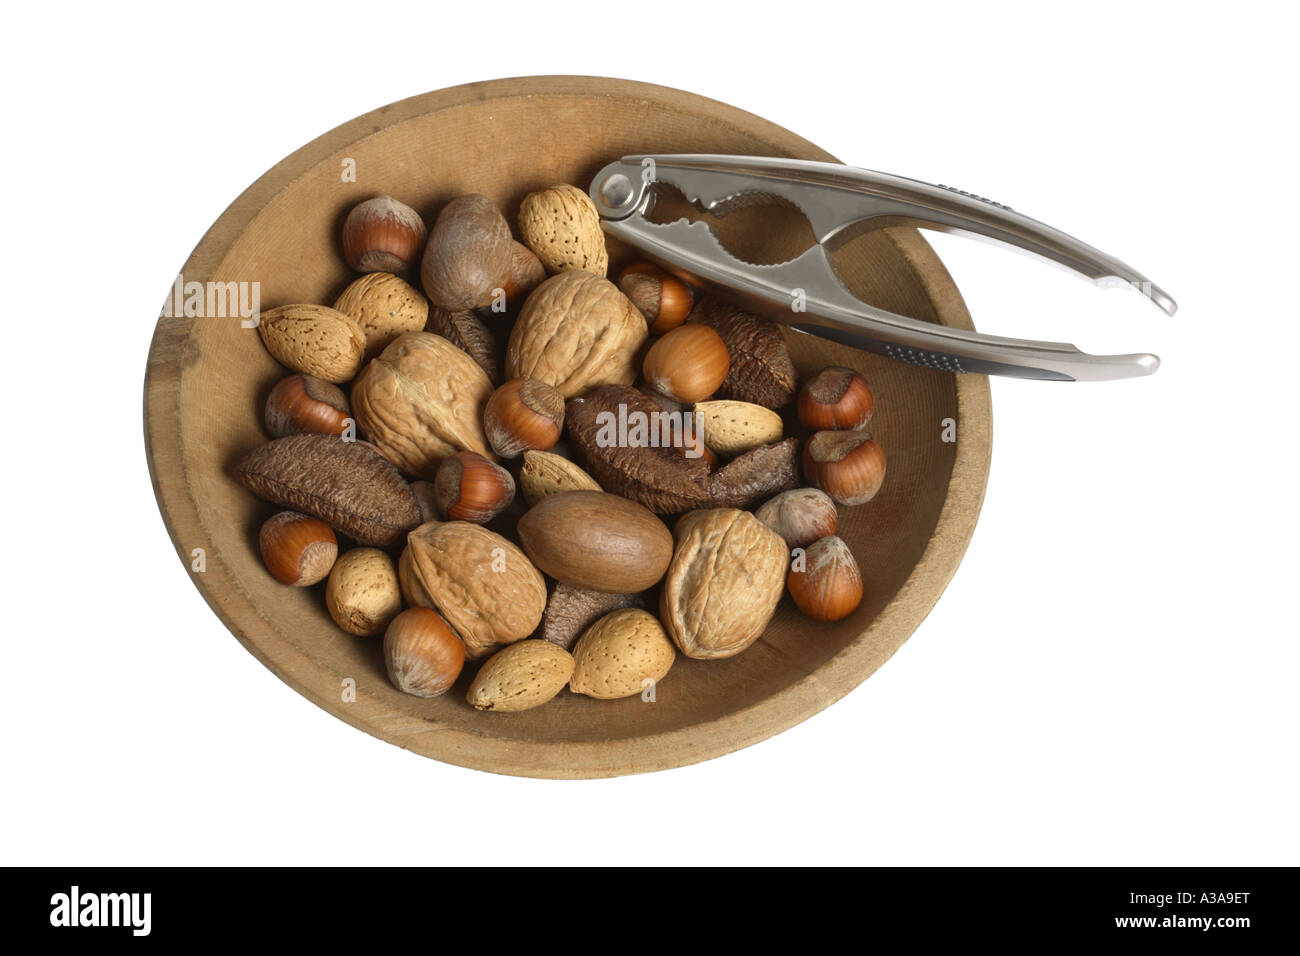 Nuts in Wooden Bowl with Nutcracker Stock Photo